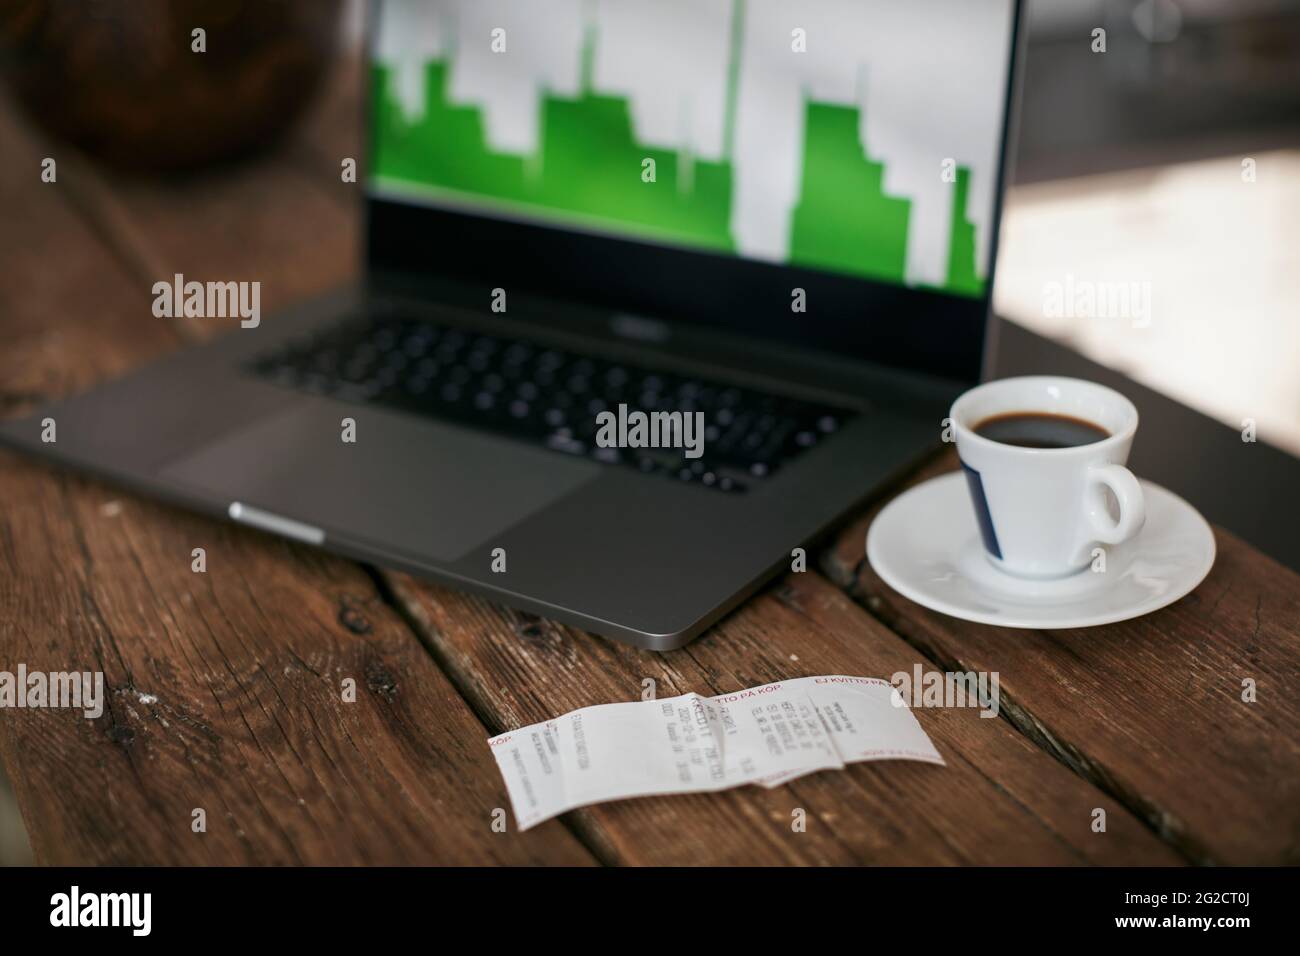 Receipt and coffee cup on worktop Stock Photo